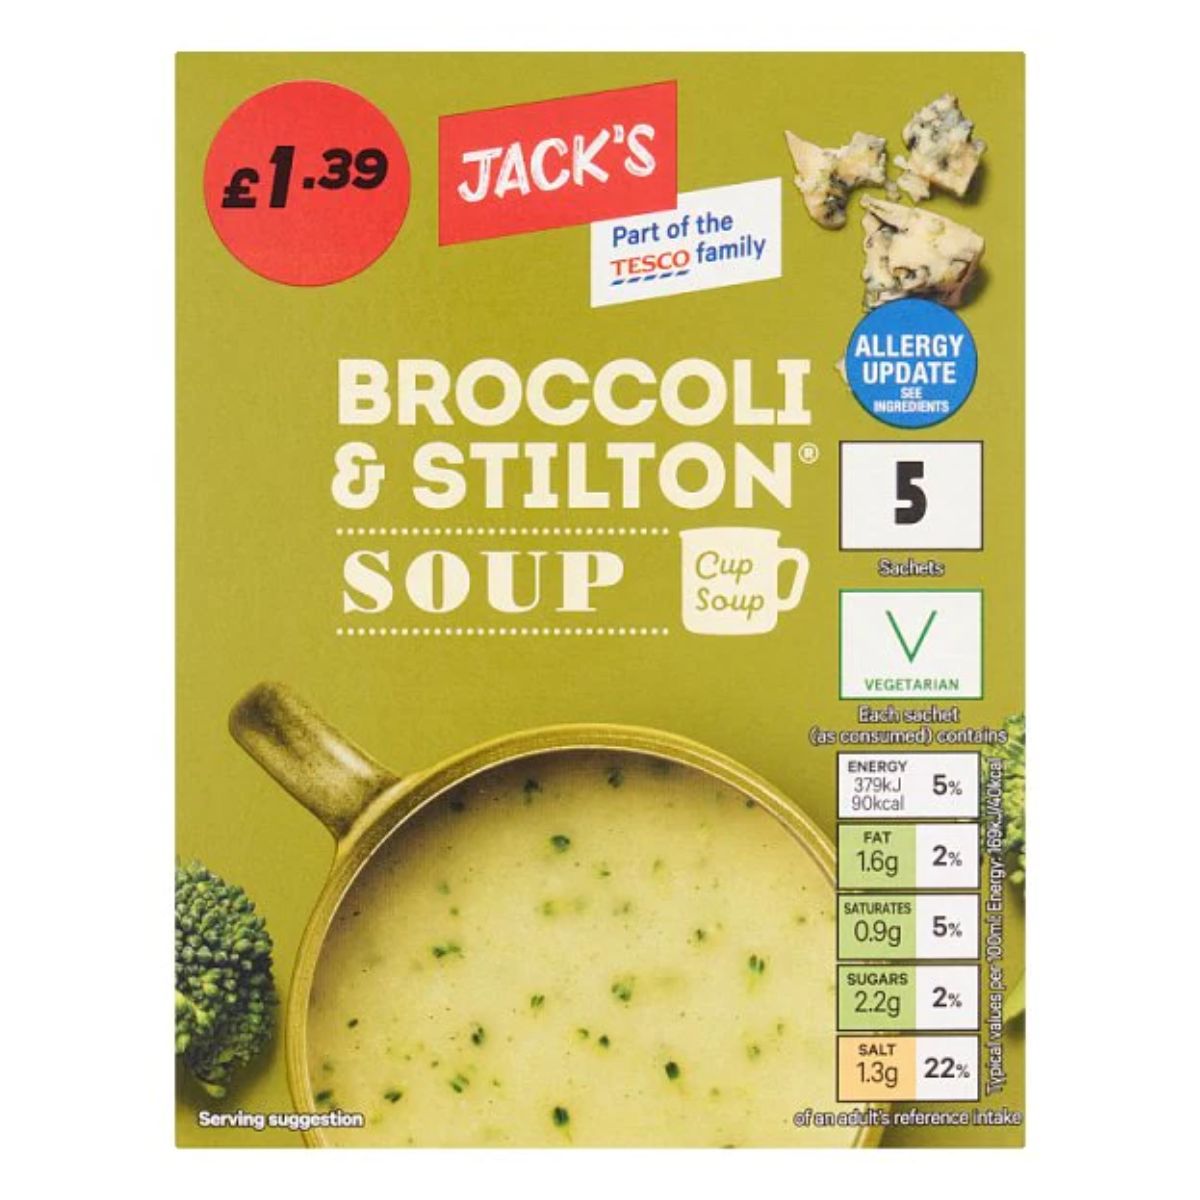 A packaged Jacks - Broccoli and Stilton Cup Soup - 120g with allergy information and nutritional details displayed on the label.